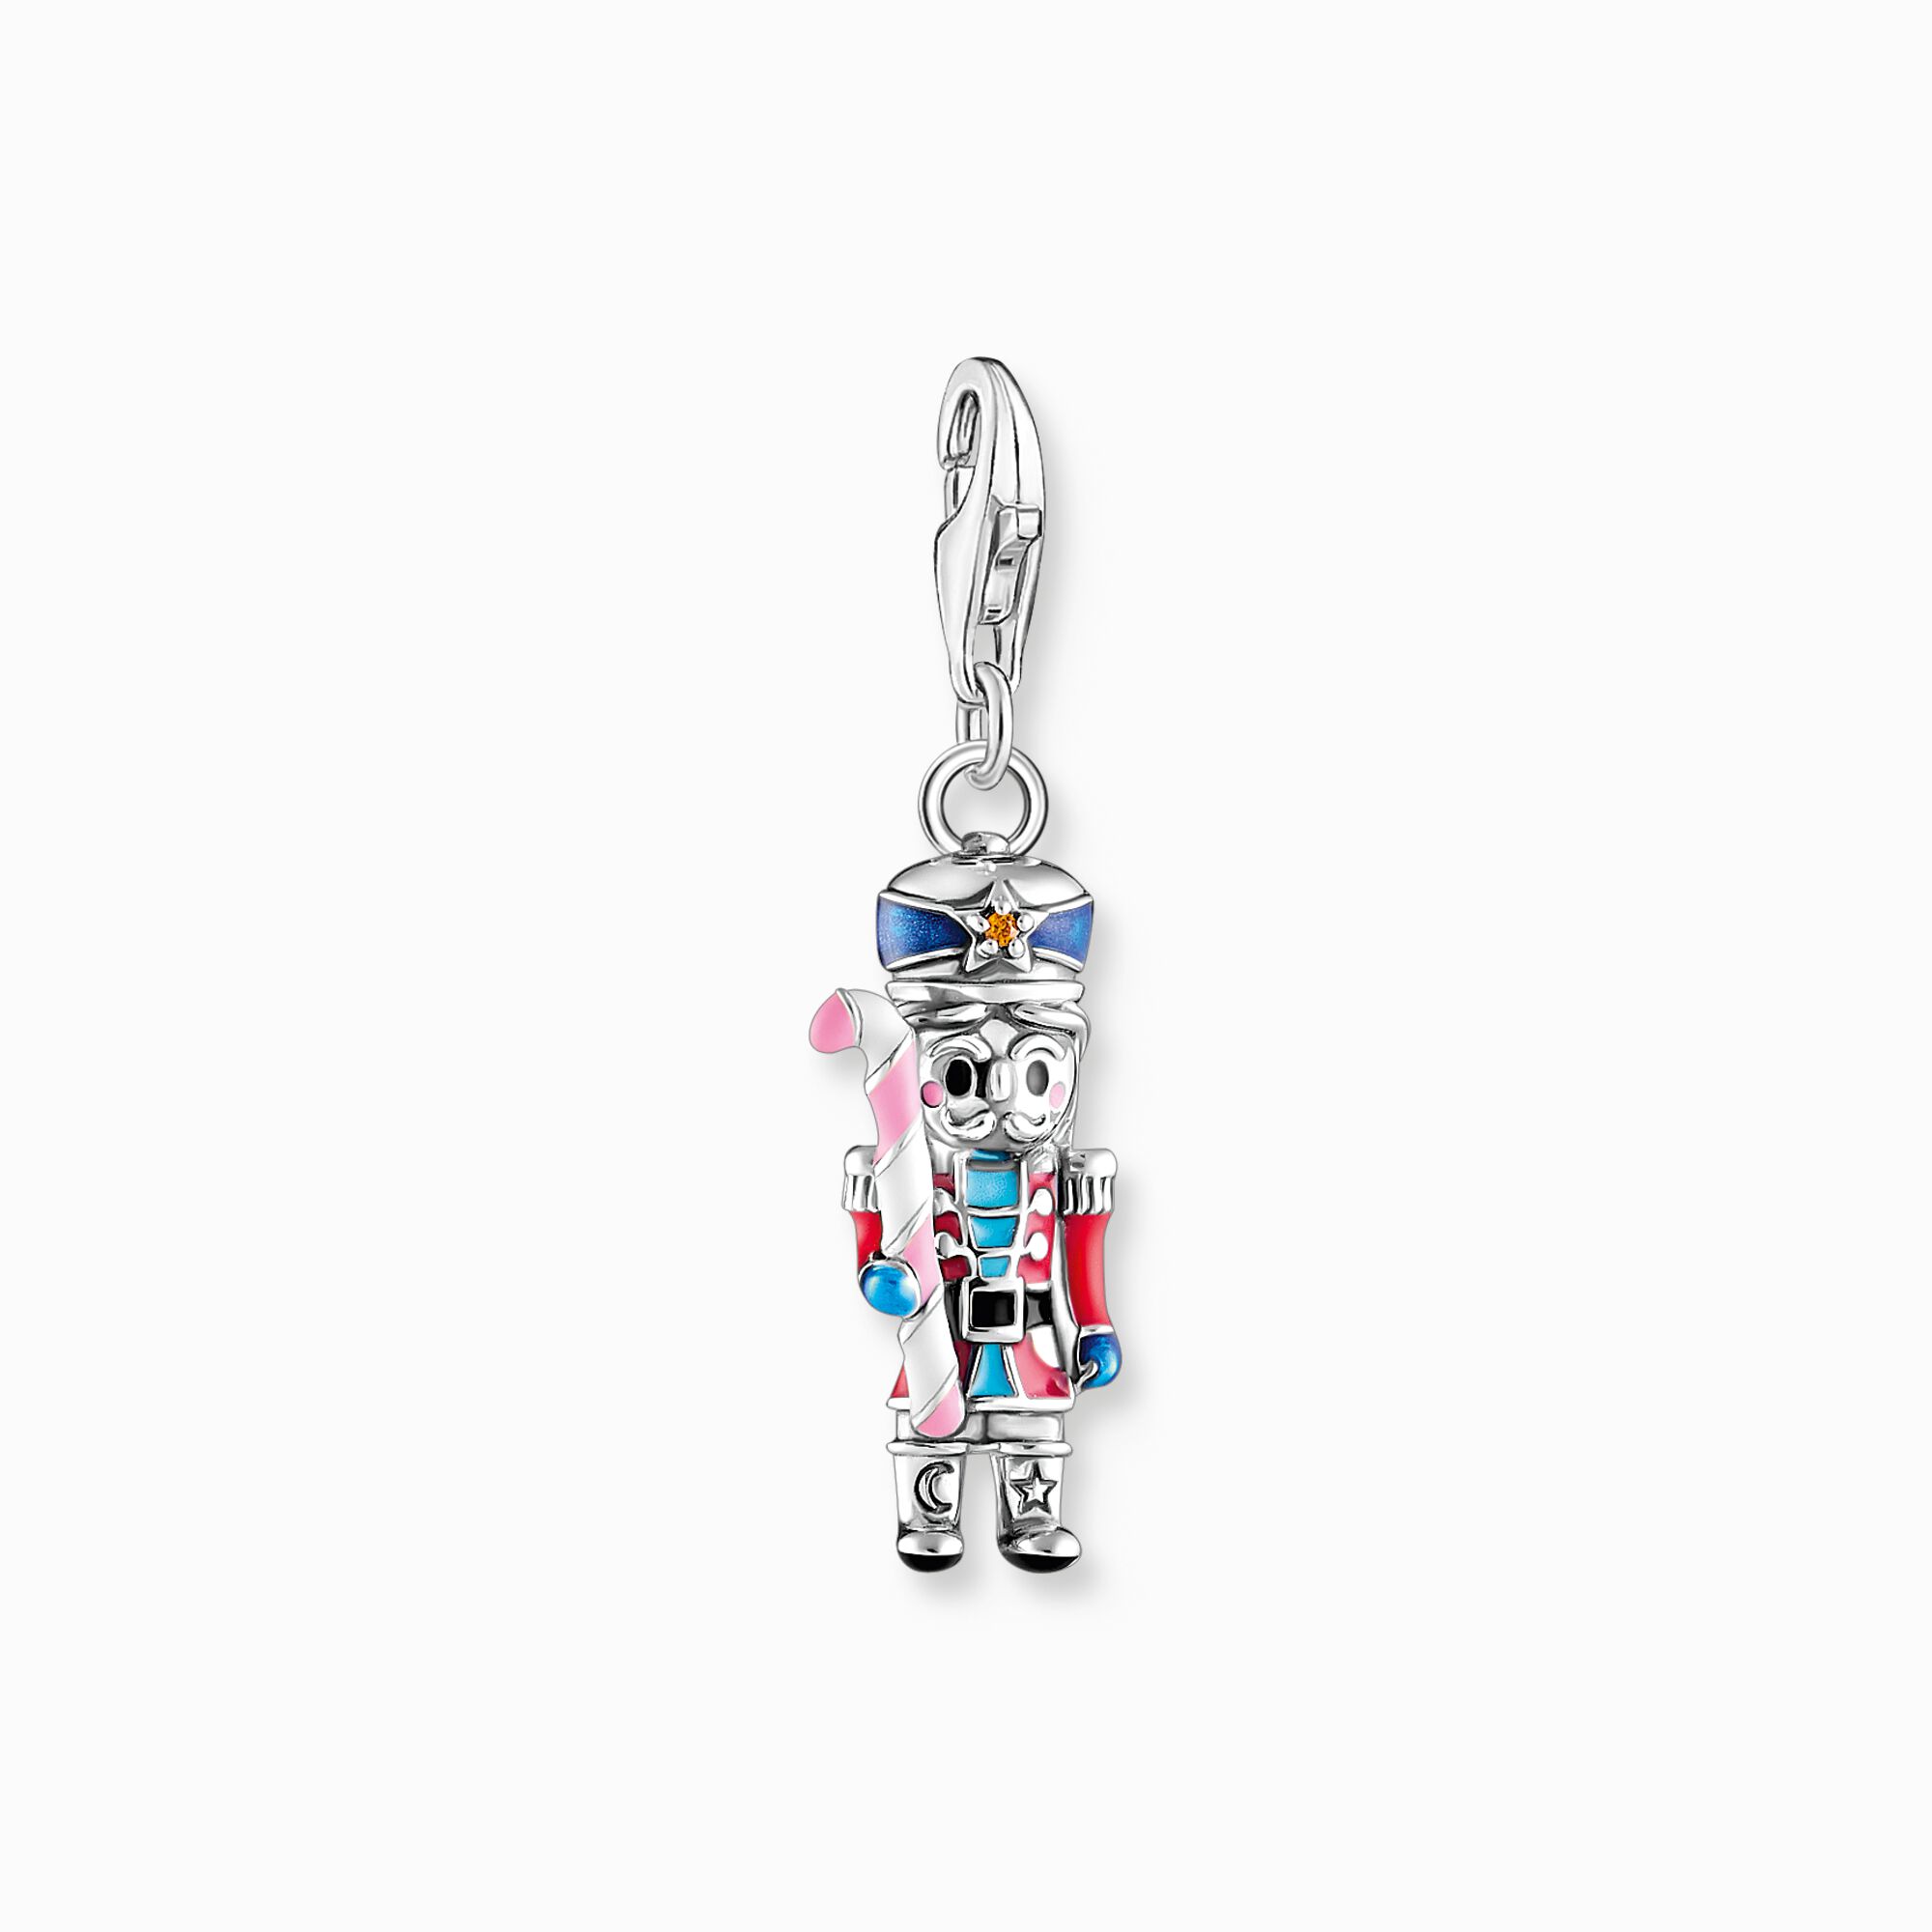 Silver nutcracker charm pendant stones from the Charm Club collection in the THOMAS SABO online store